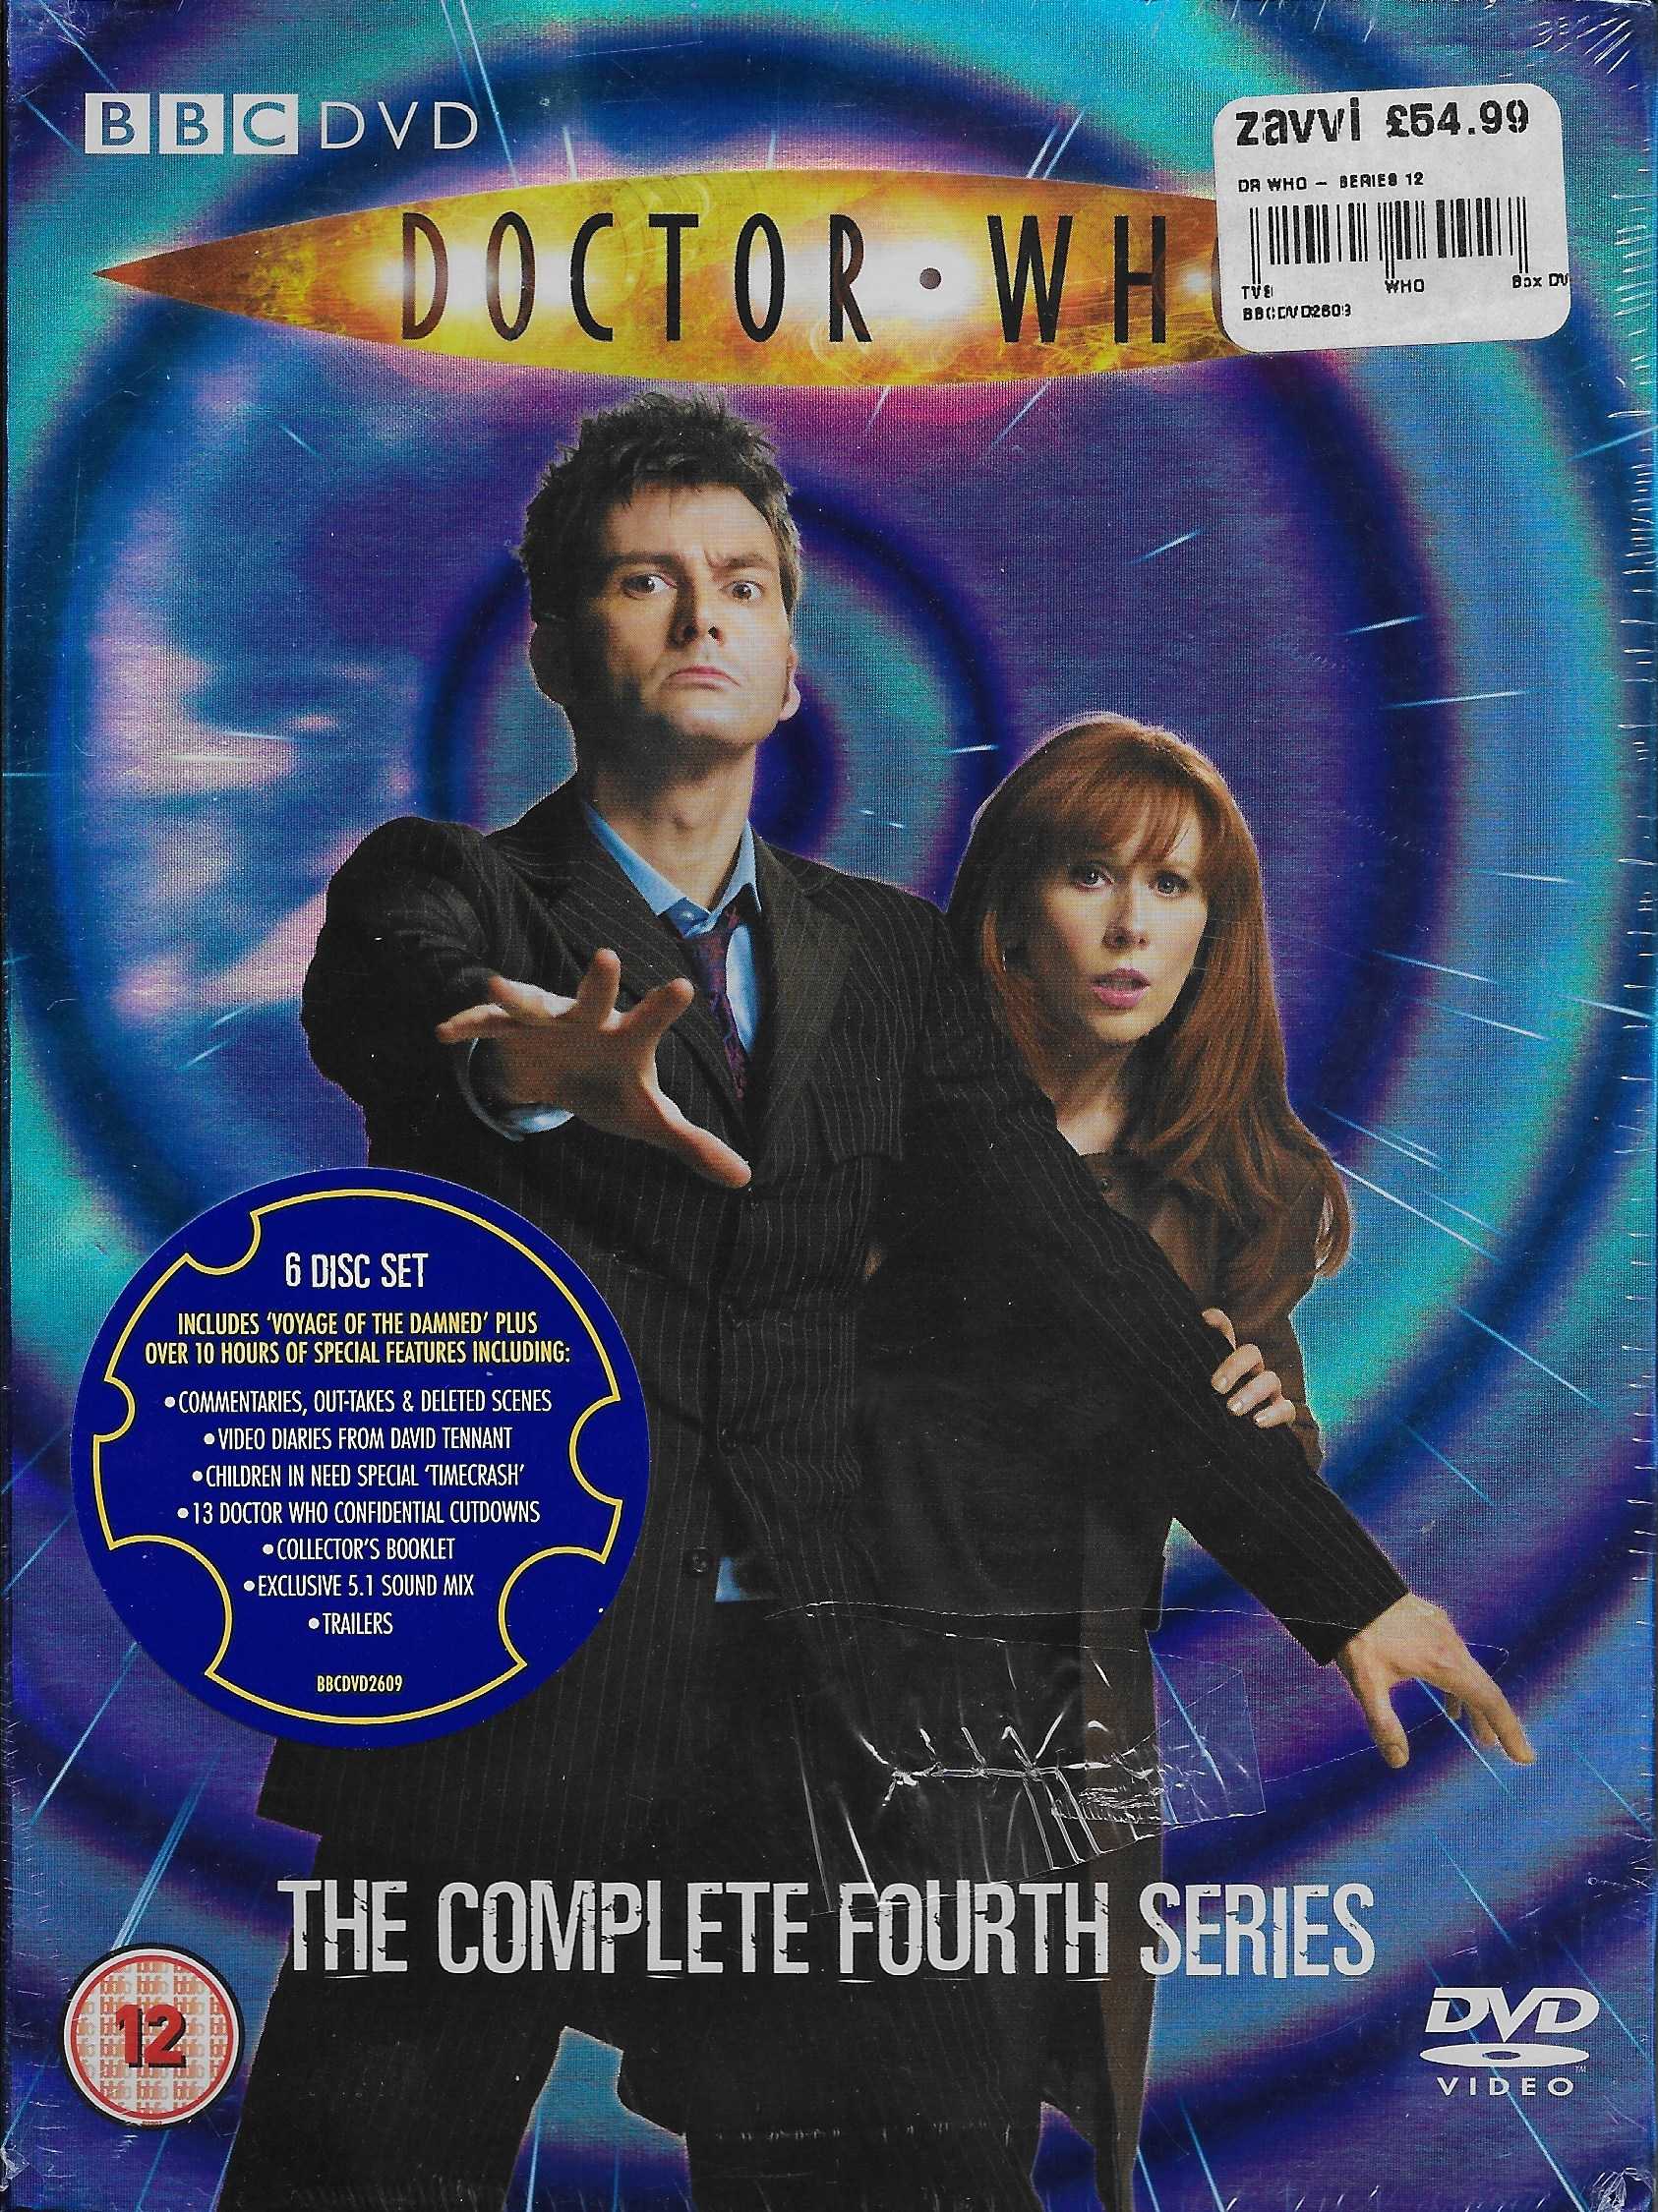 Picture of BBCDVD 2609 Doctor Who - Series 4 by artist Various from the BBC dvds - Records and Tapes library